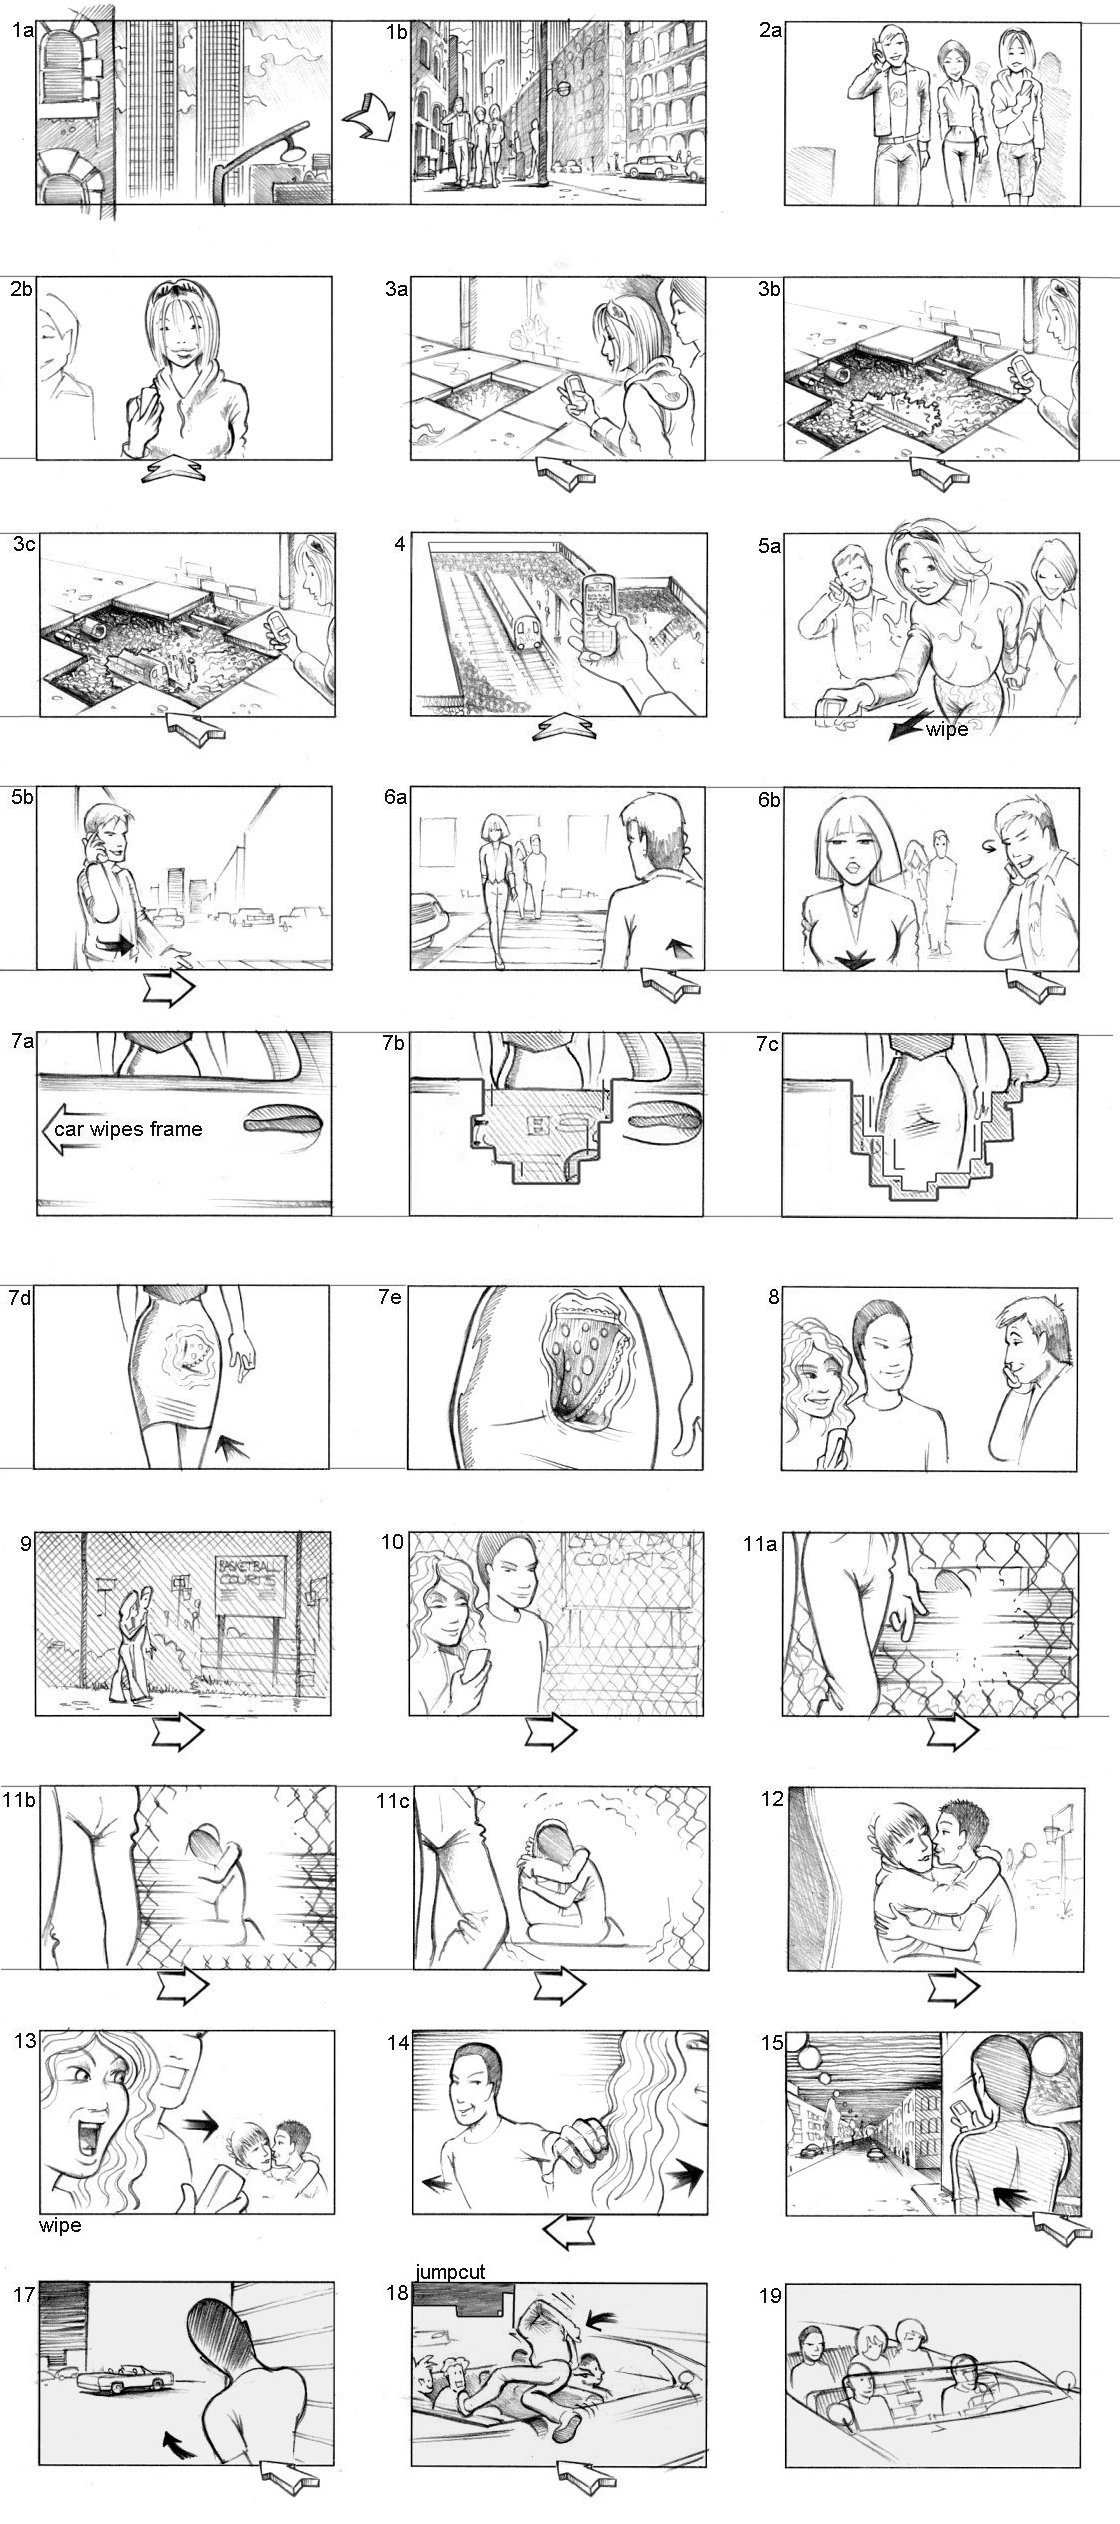 T-MOBILE STORYBOARDS BY ANDY SPARROW